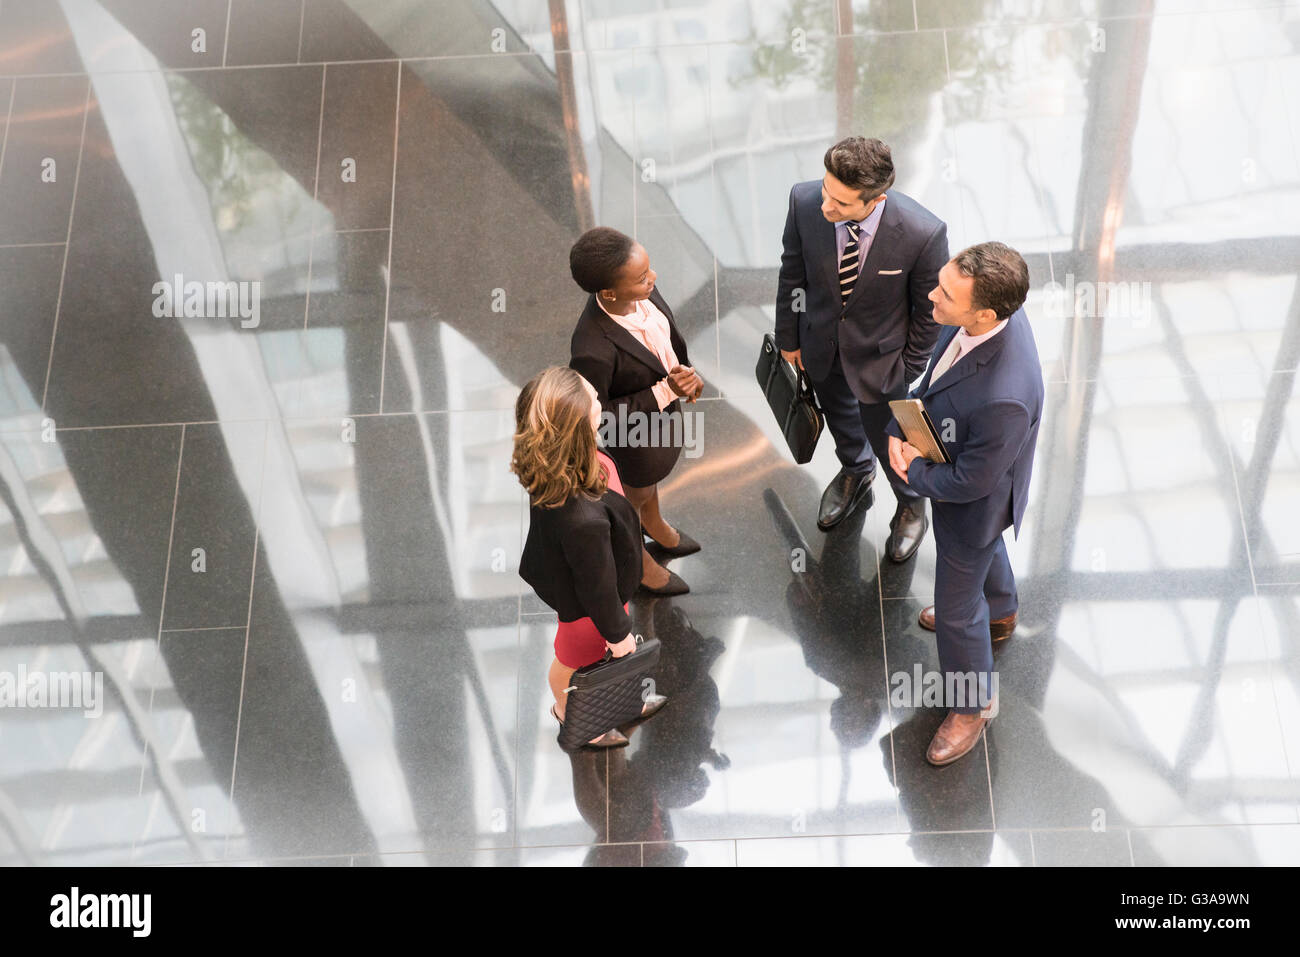 Corporate Business people talking in office lobby moderne Banque D'Images